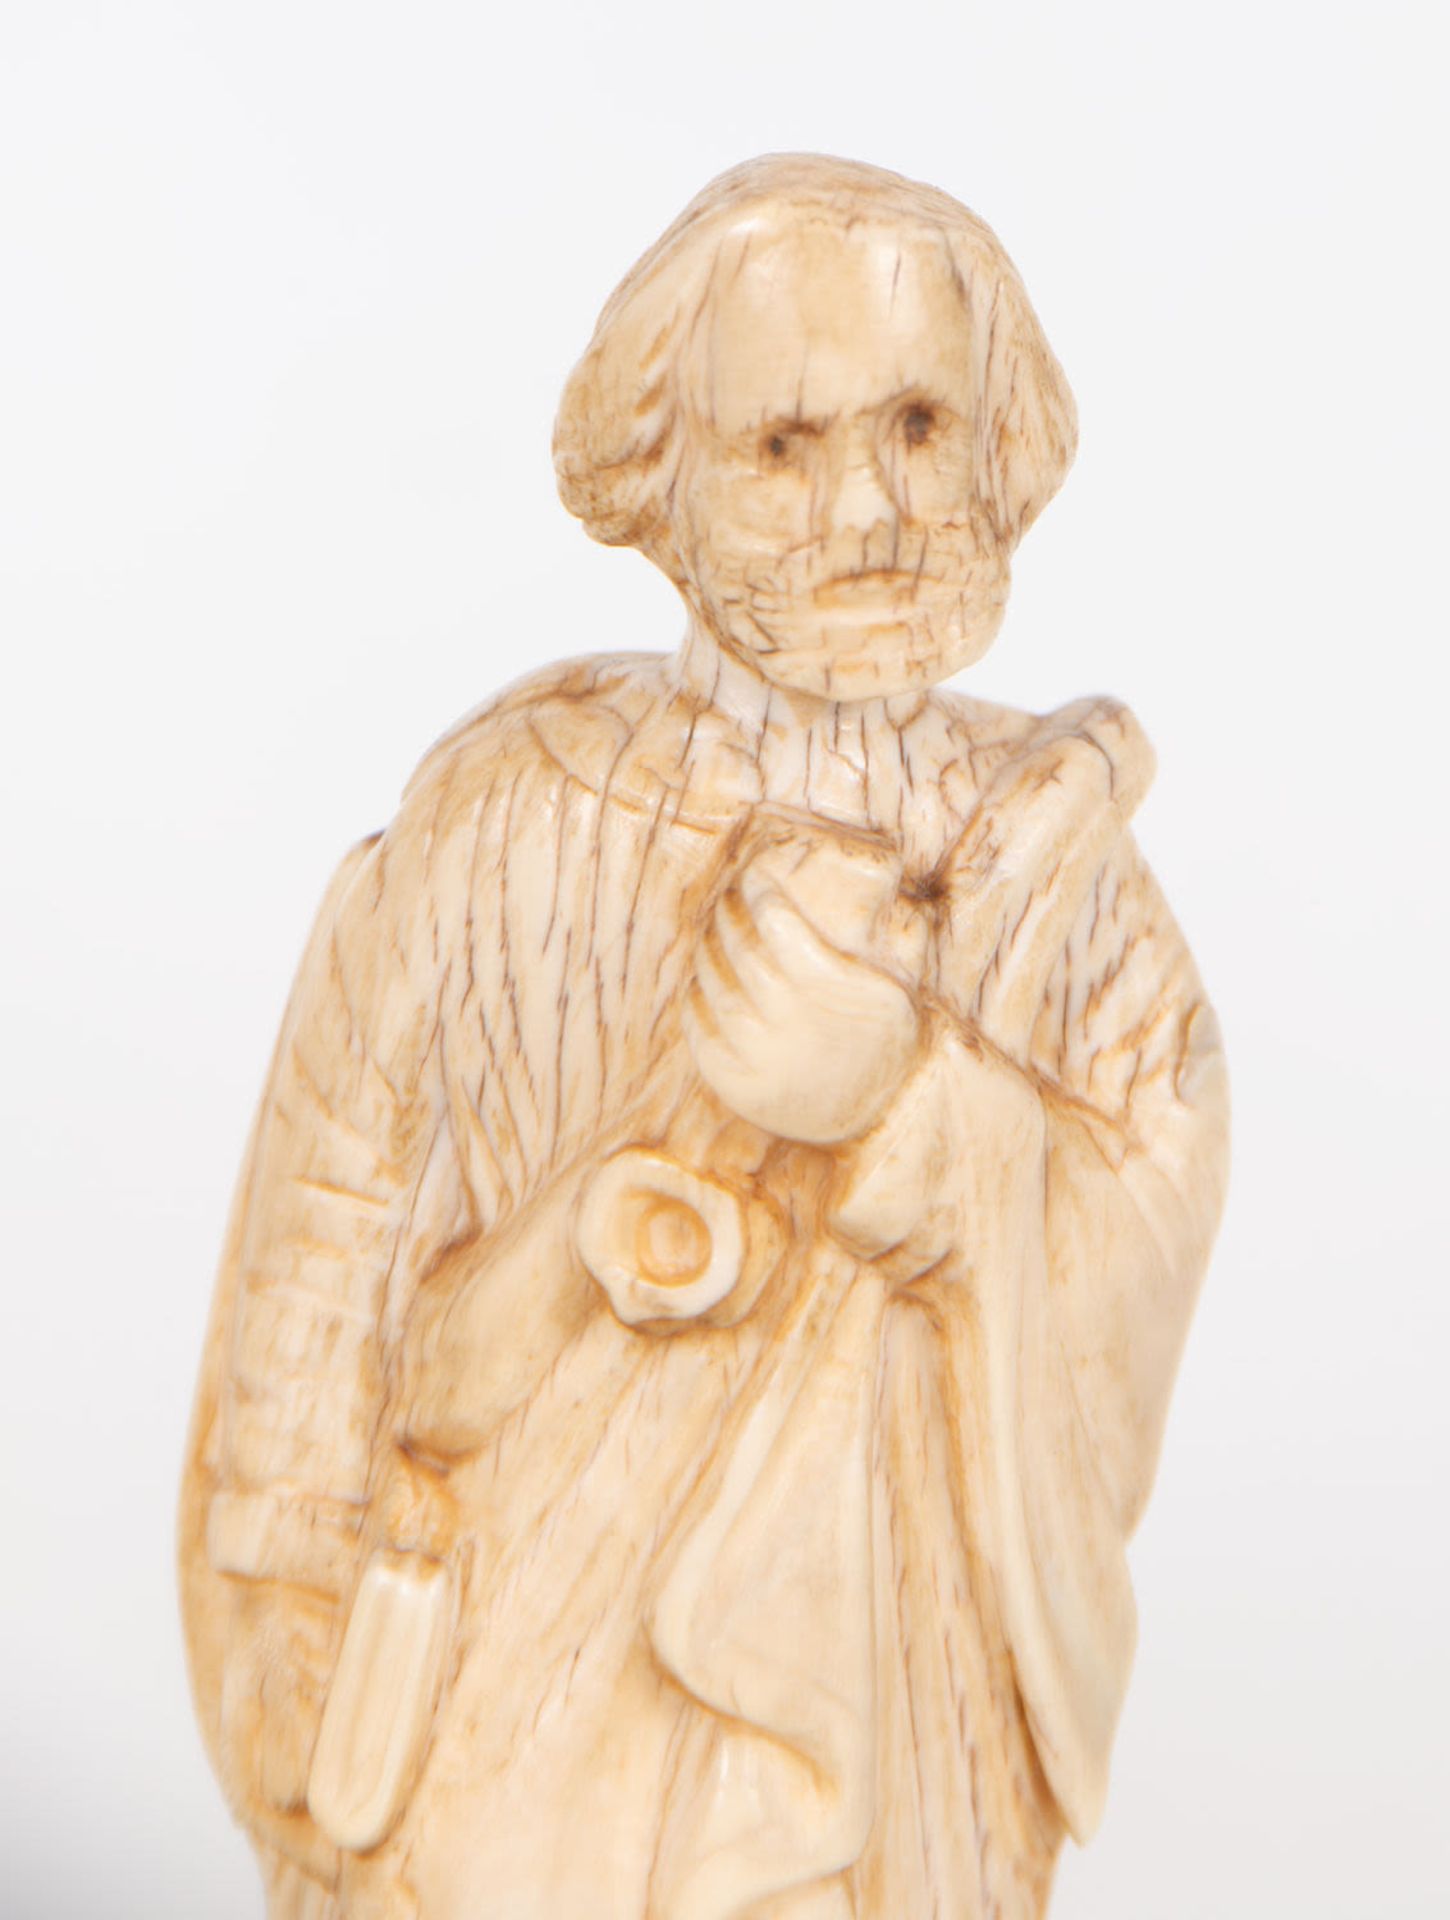 Saint Peter and Saint Paul in Ivory, Central European School, 17th century - Image 4 of 8